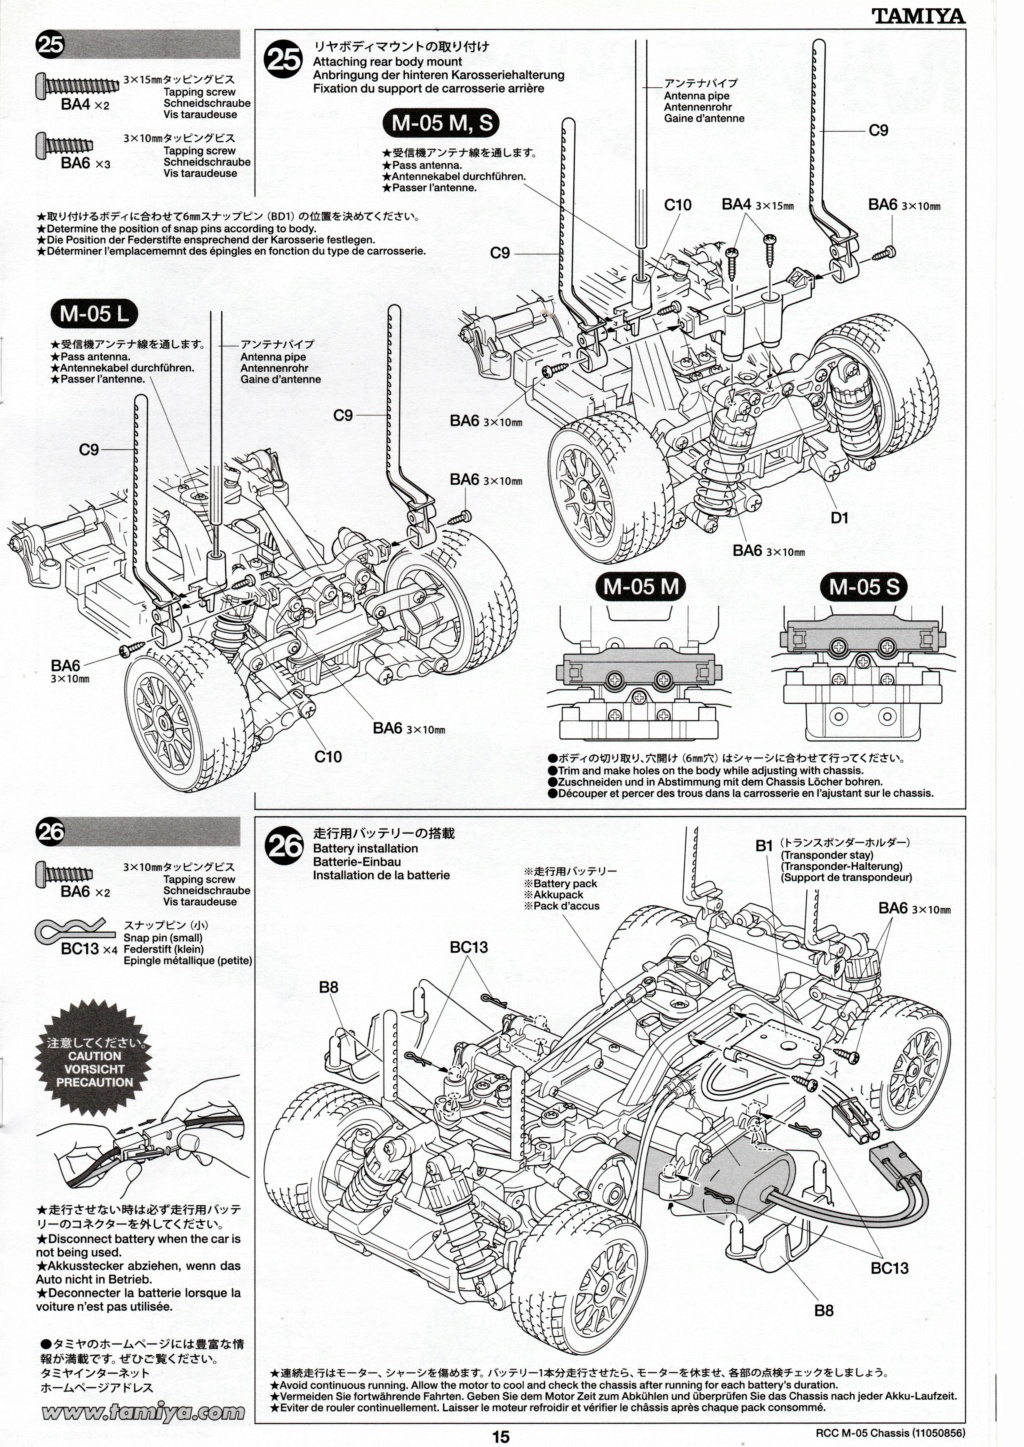 1/10 NSU TT - TAMIYA RC - CHASSIS M-05 (FINI PAGE 4) - Page 3 Phase_65